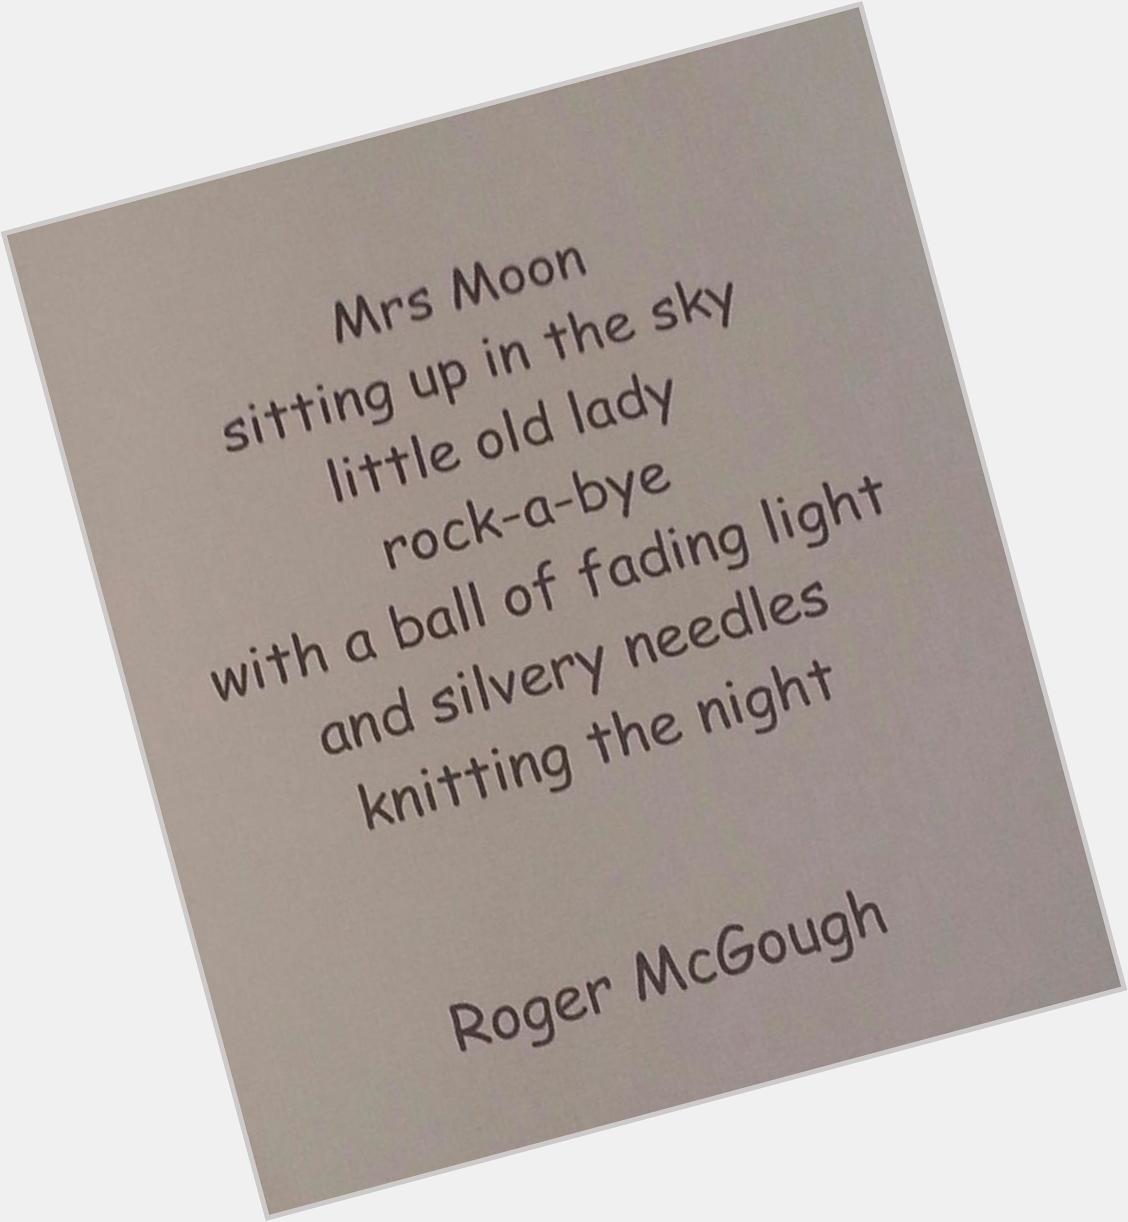 Happy birthday Roger McGough, who showed me that poetry could be cool. 